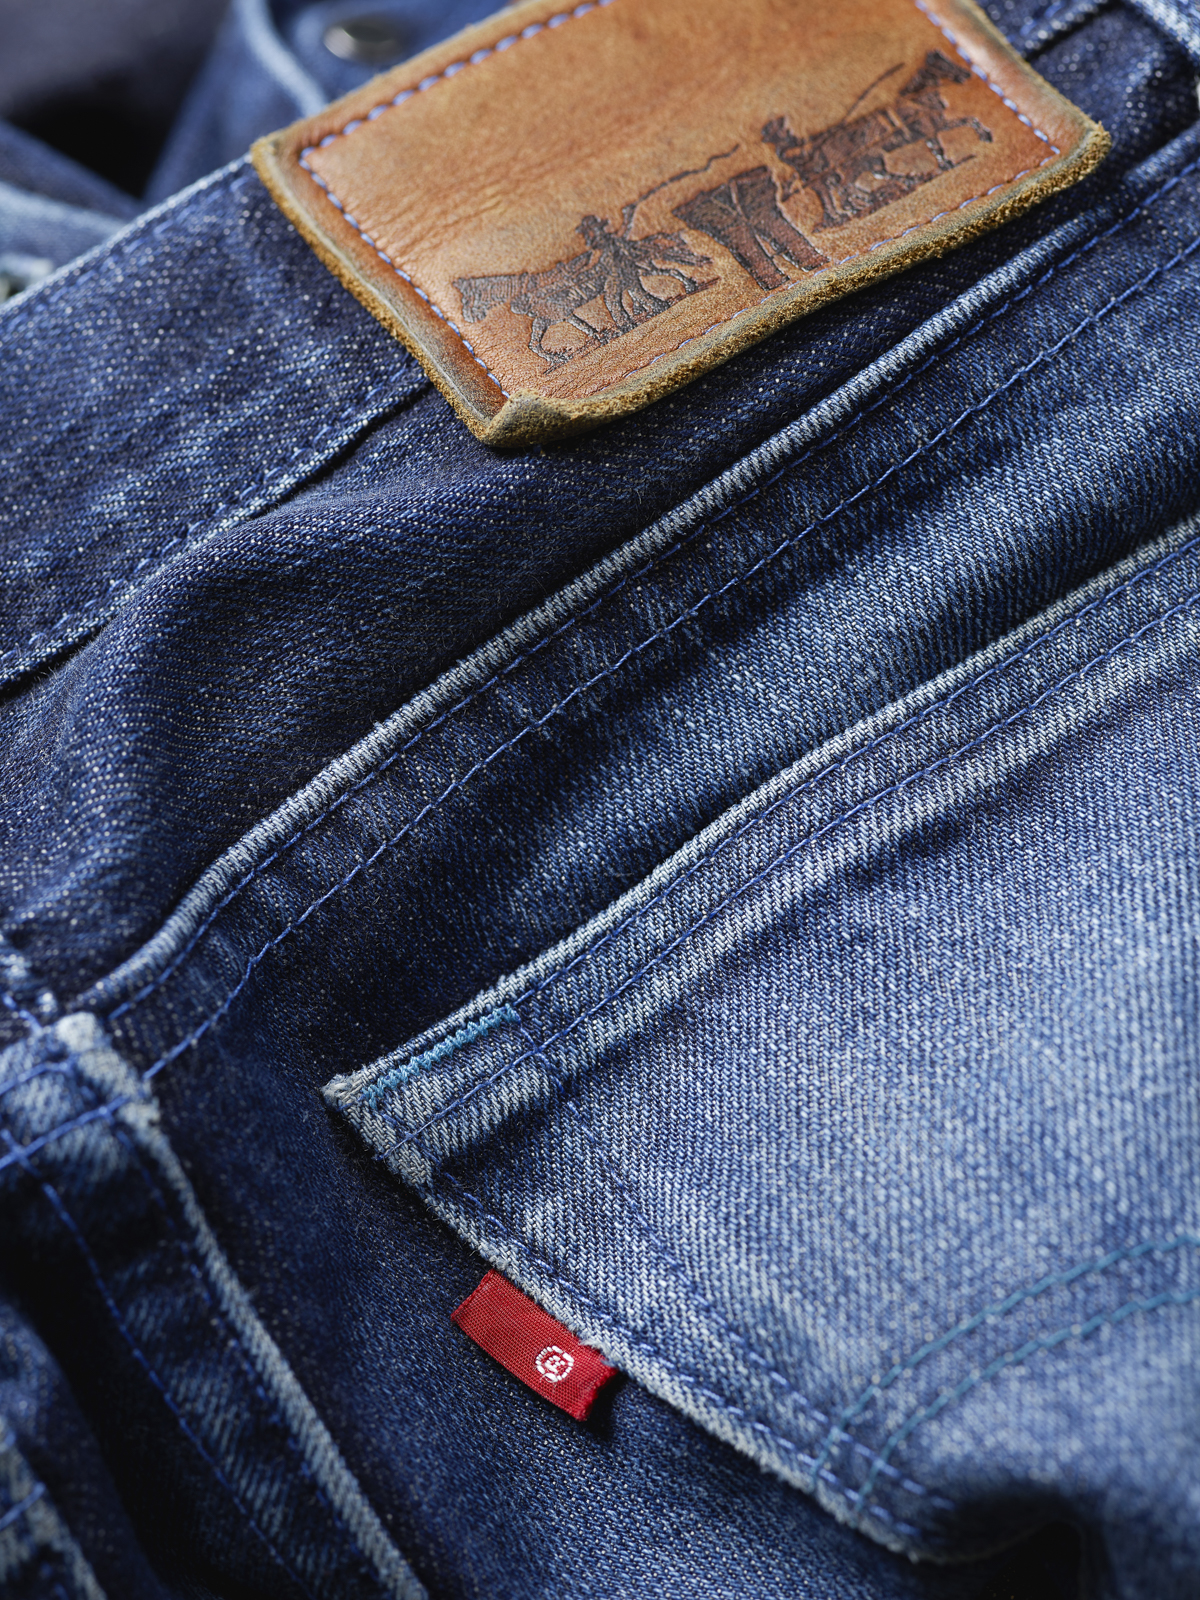 Levi’s bespoke jeans – Update and 501st pair – Permanent Style